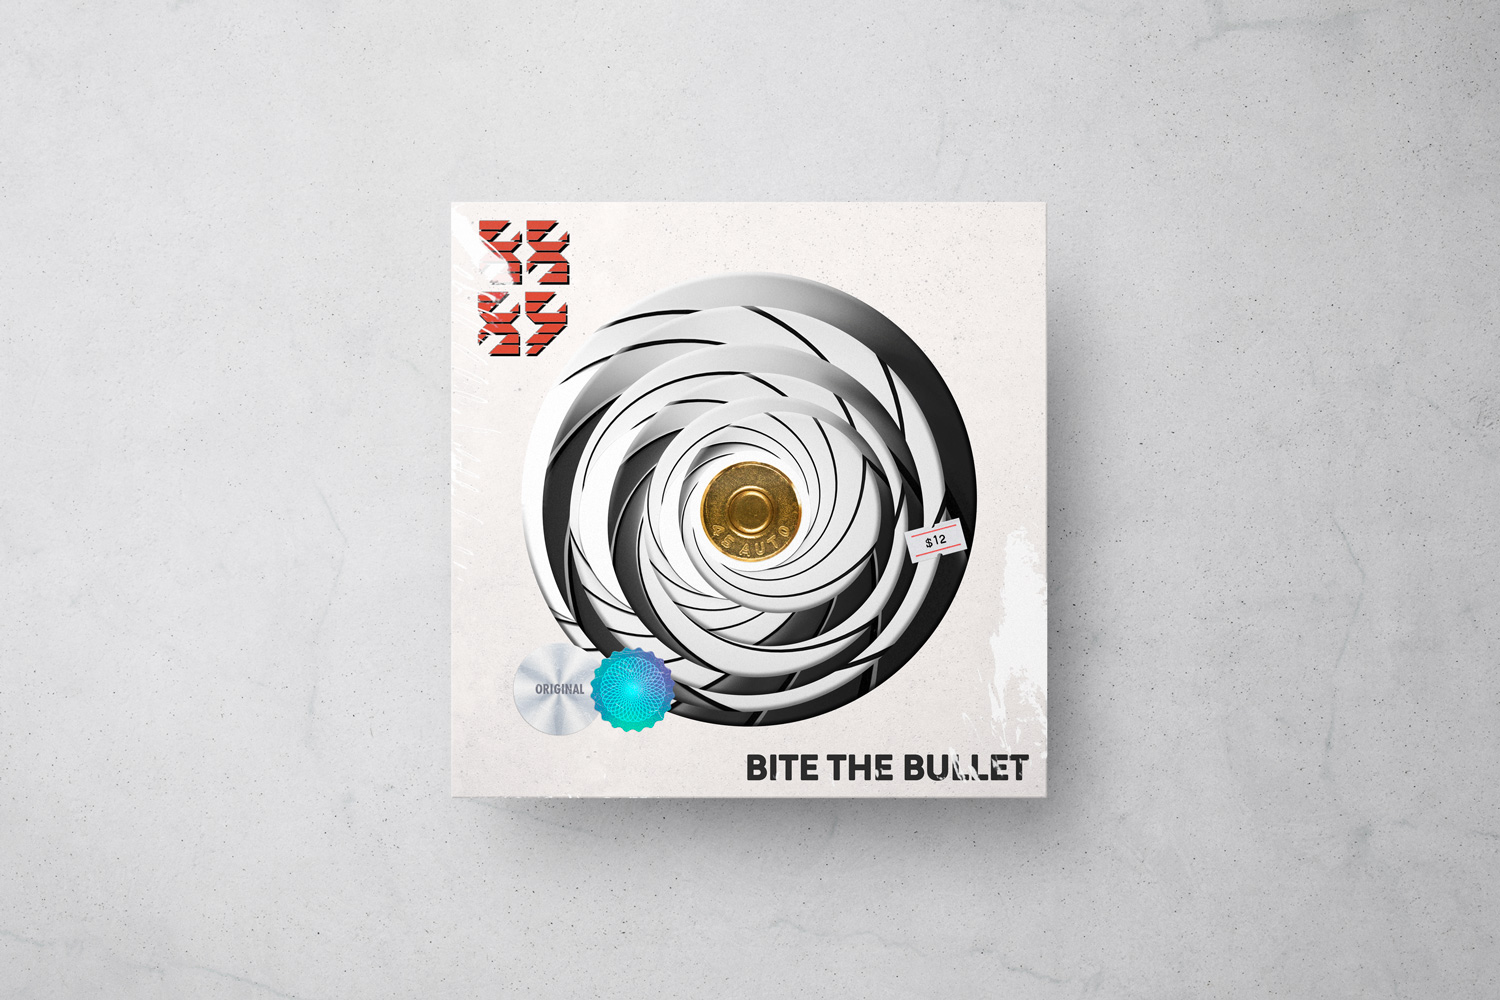 Bite the Bullet by 88/89 – Single cover